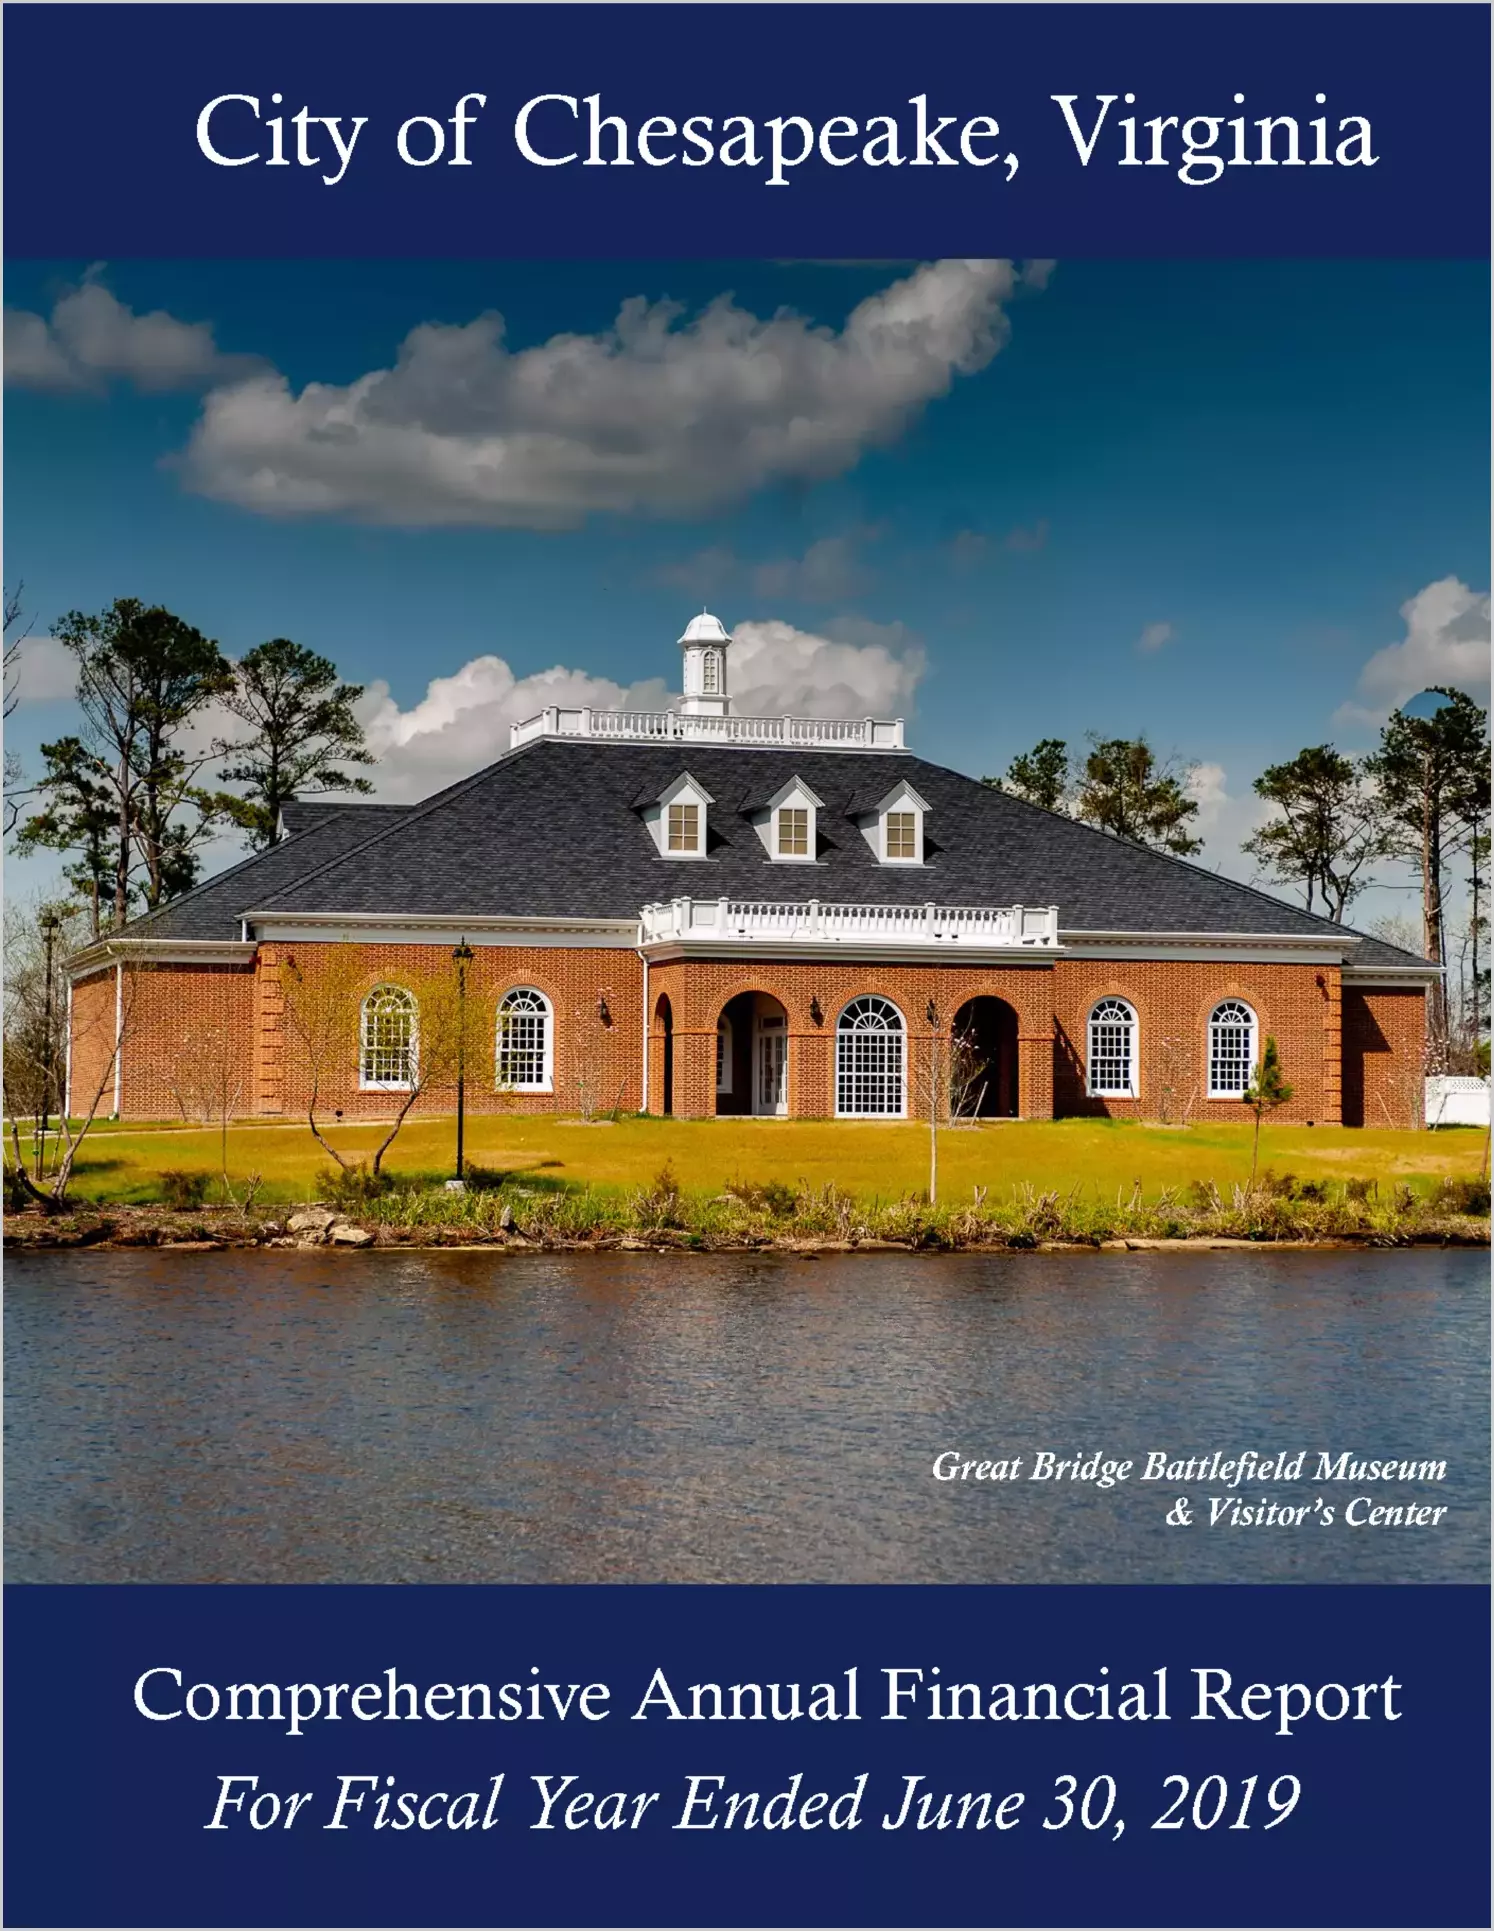 2019 Annual Financial Report for City of Chesapeake